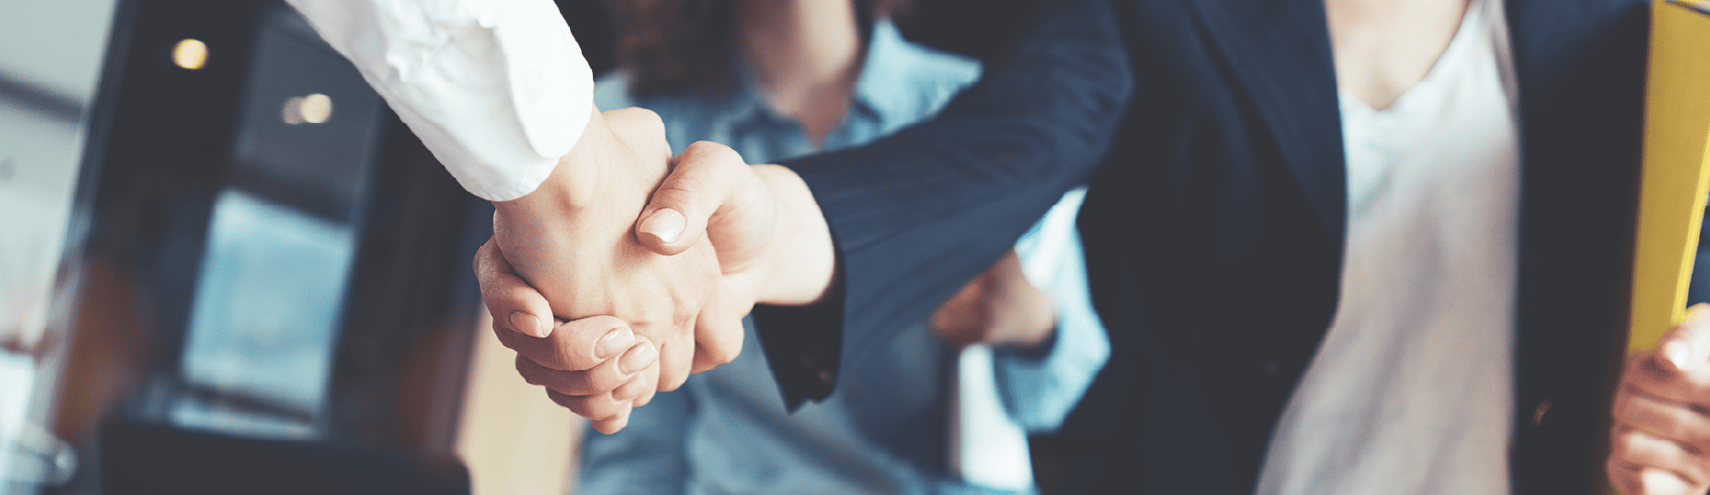 A bussiness handshake with the focus on the hands.